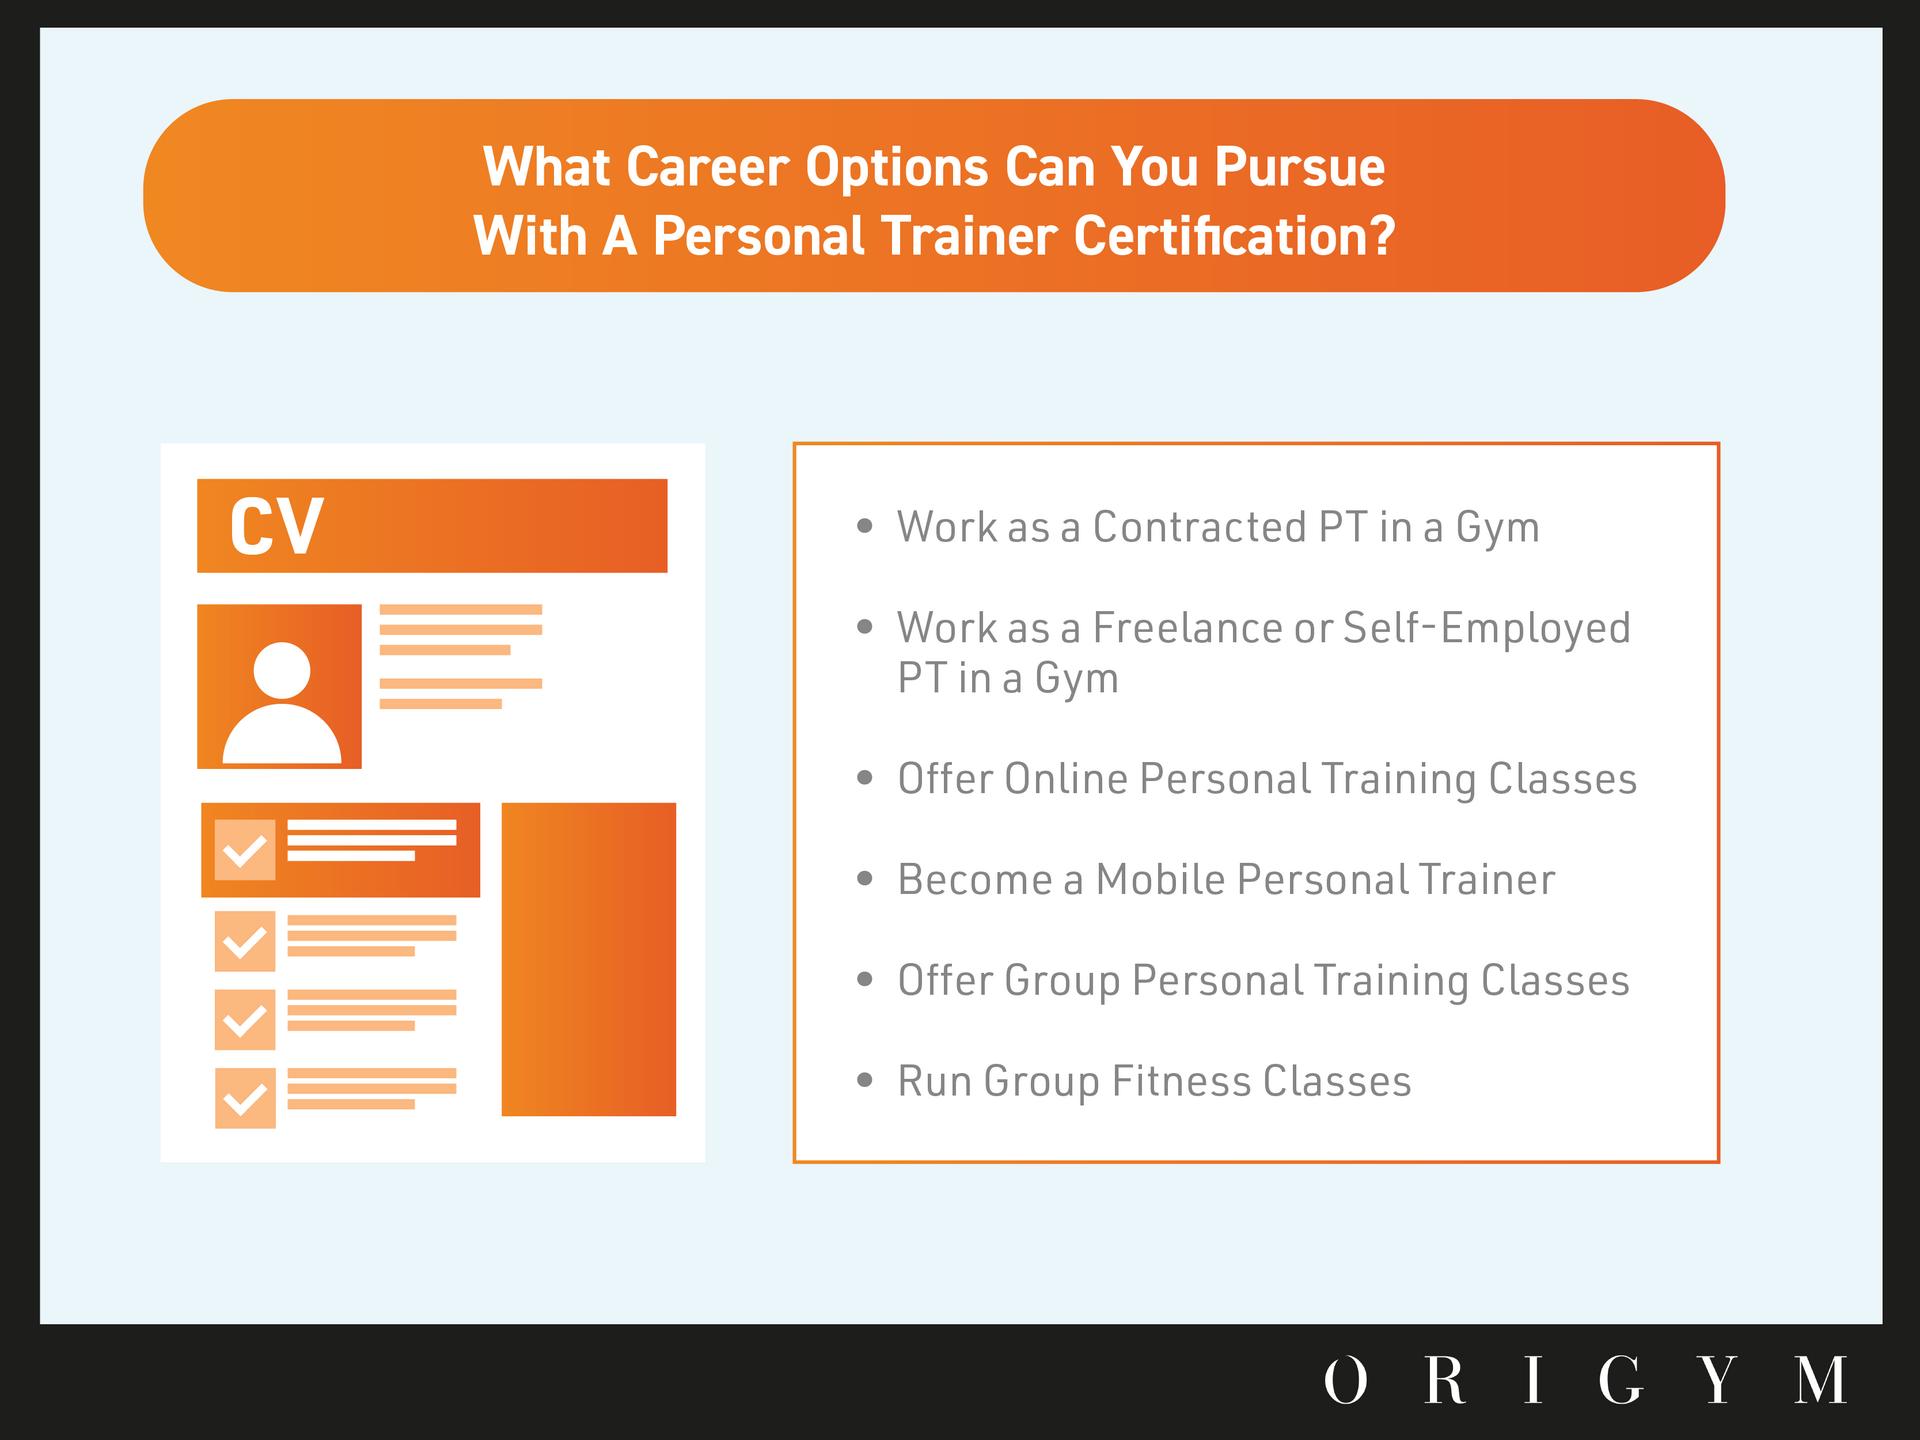 What Career Options Can You Pursue With a Personal Trainer Certification Infographic